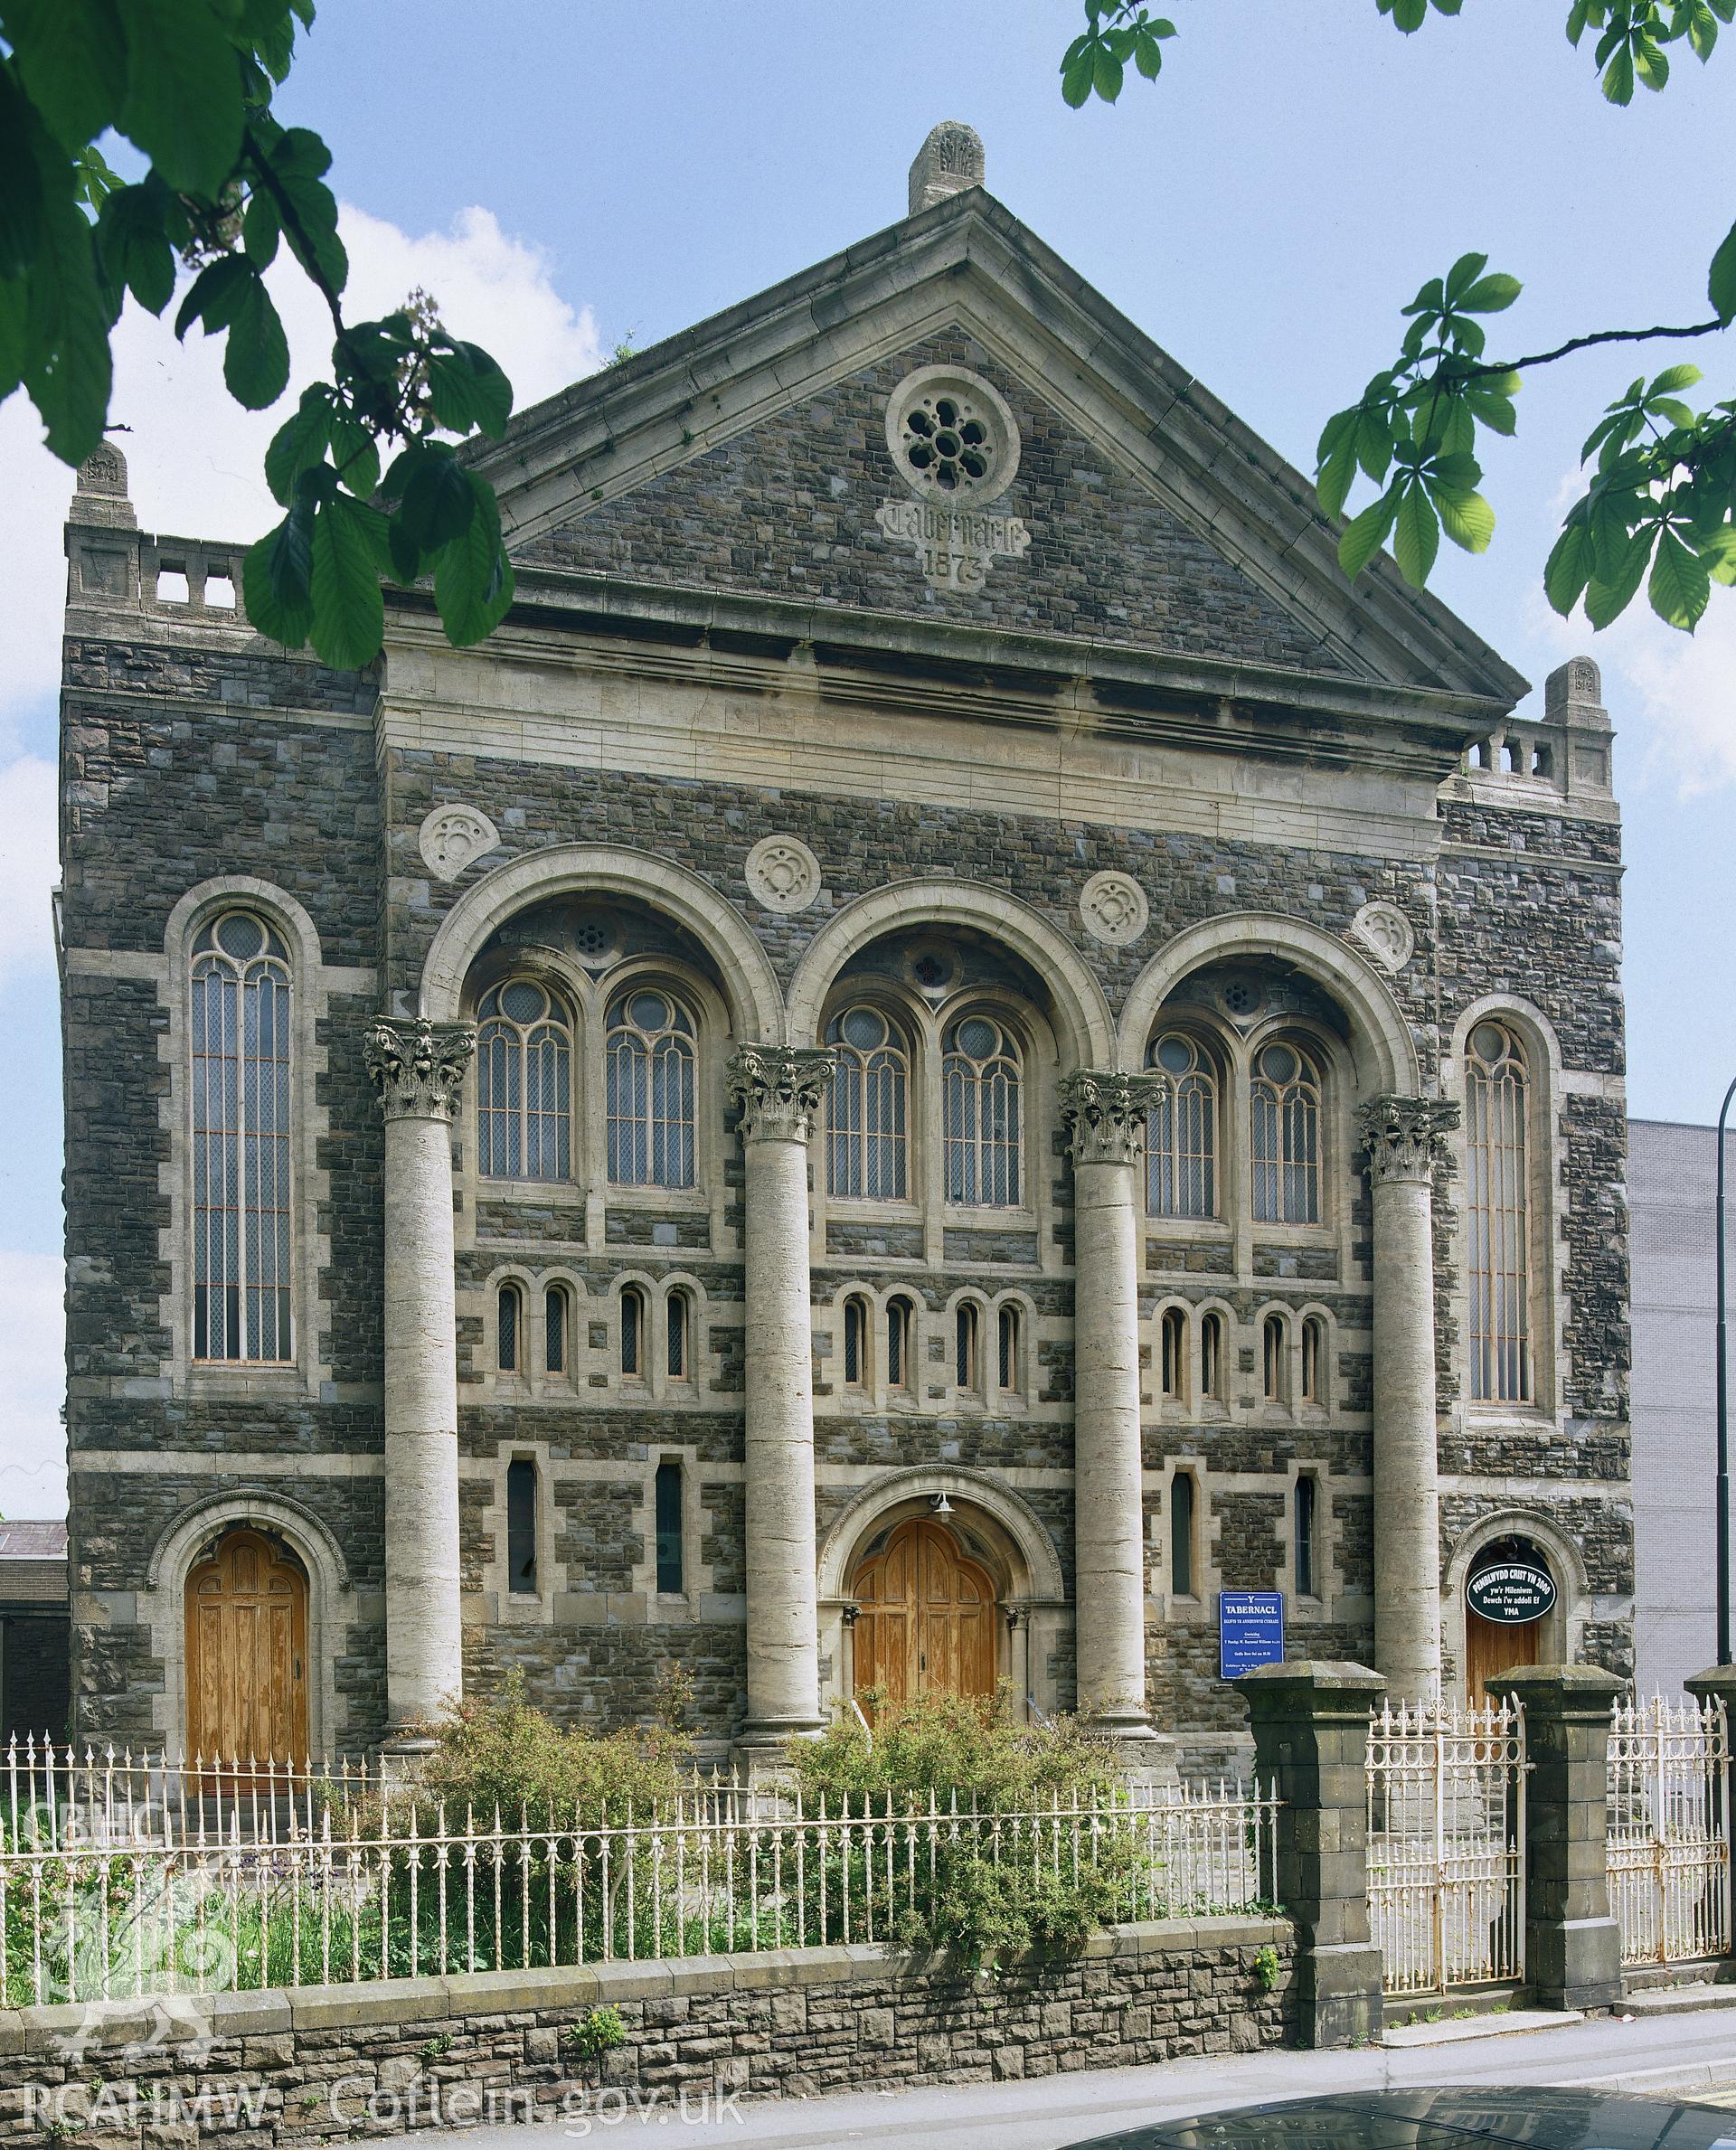 RCAHMW colour transparency showing exterior view of Tabernacle Chapel, Llanelli